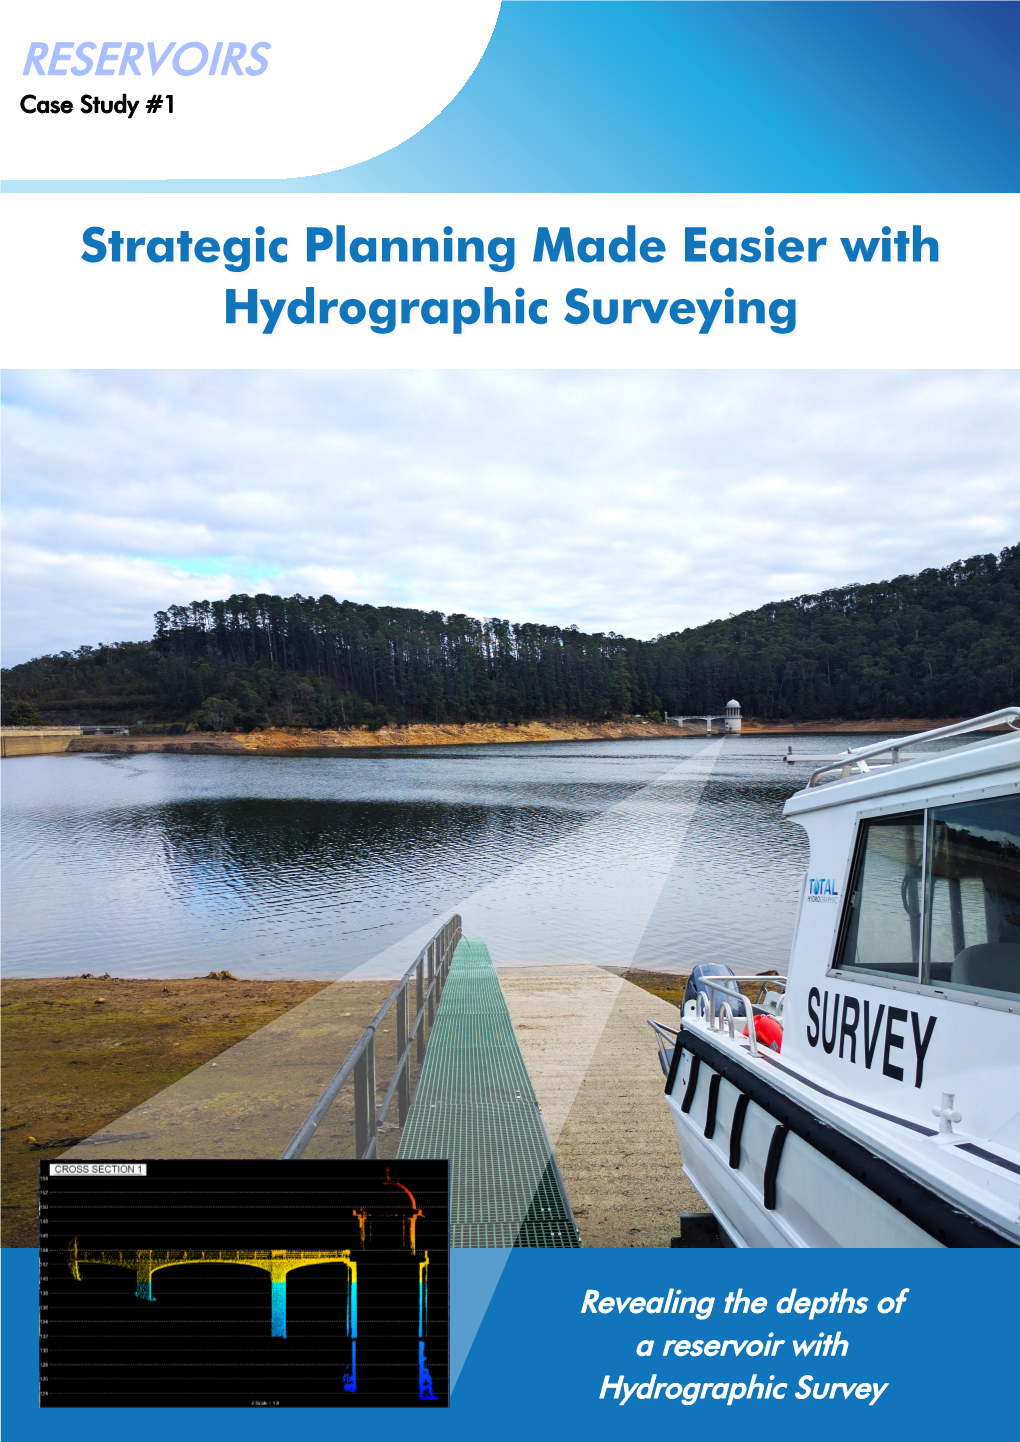 Strategic Planning Made Easier with Hydrographic Surveying